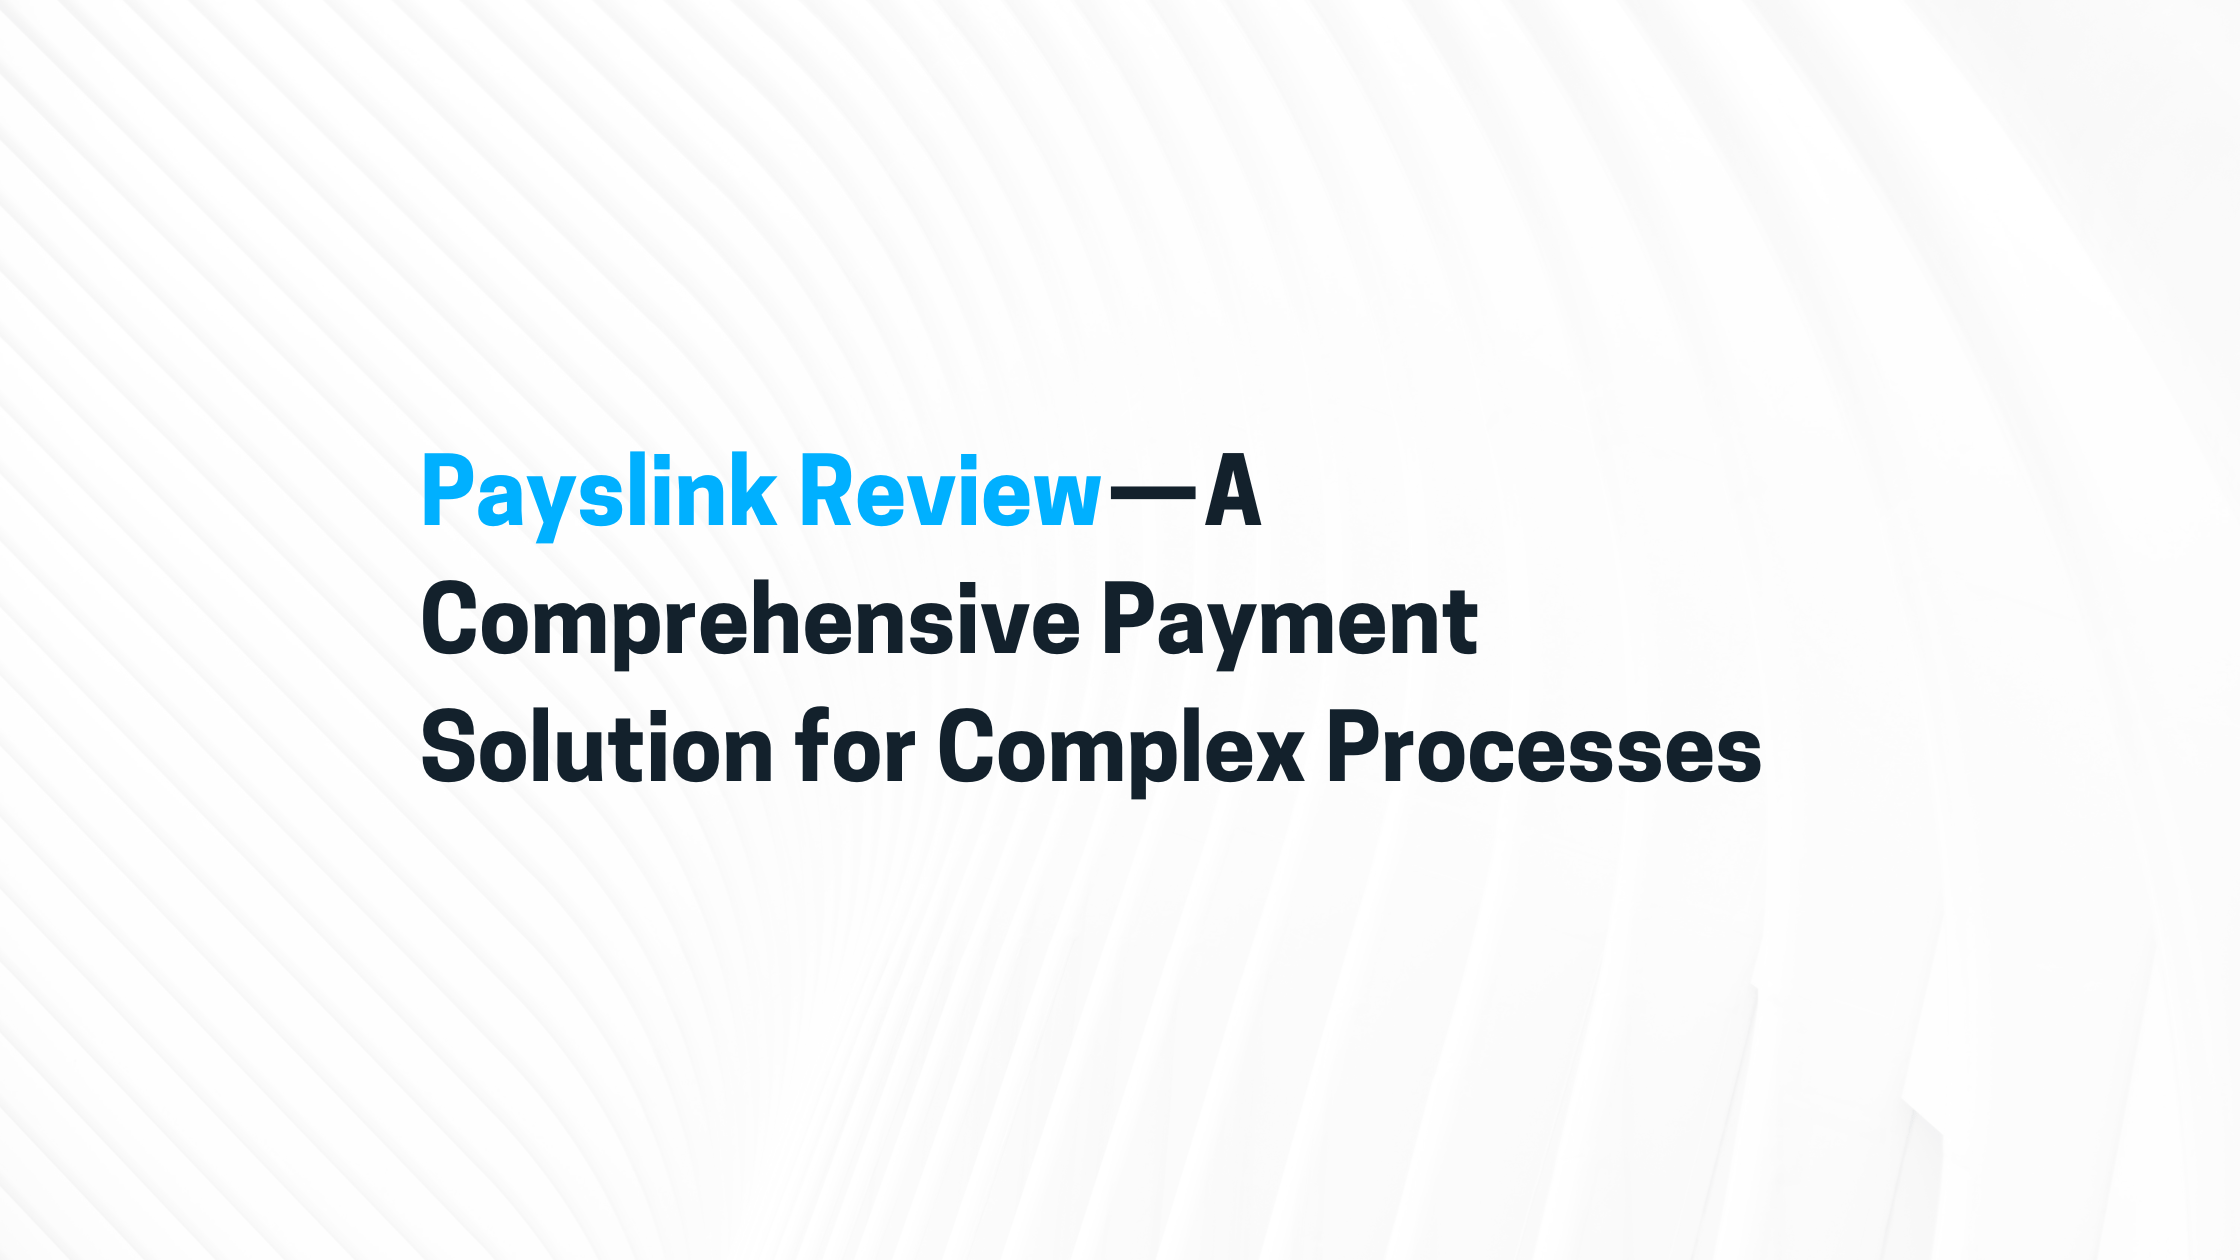 Payslink Review — A Comprehensive Payment Solution for Complex Processes 4